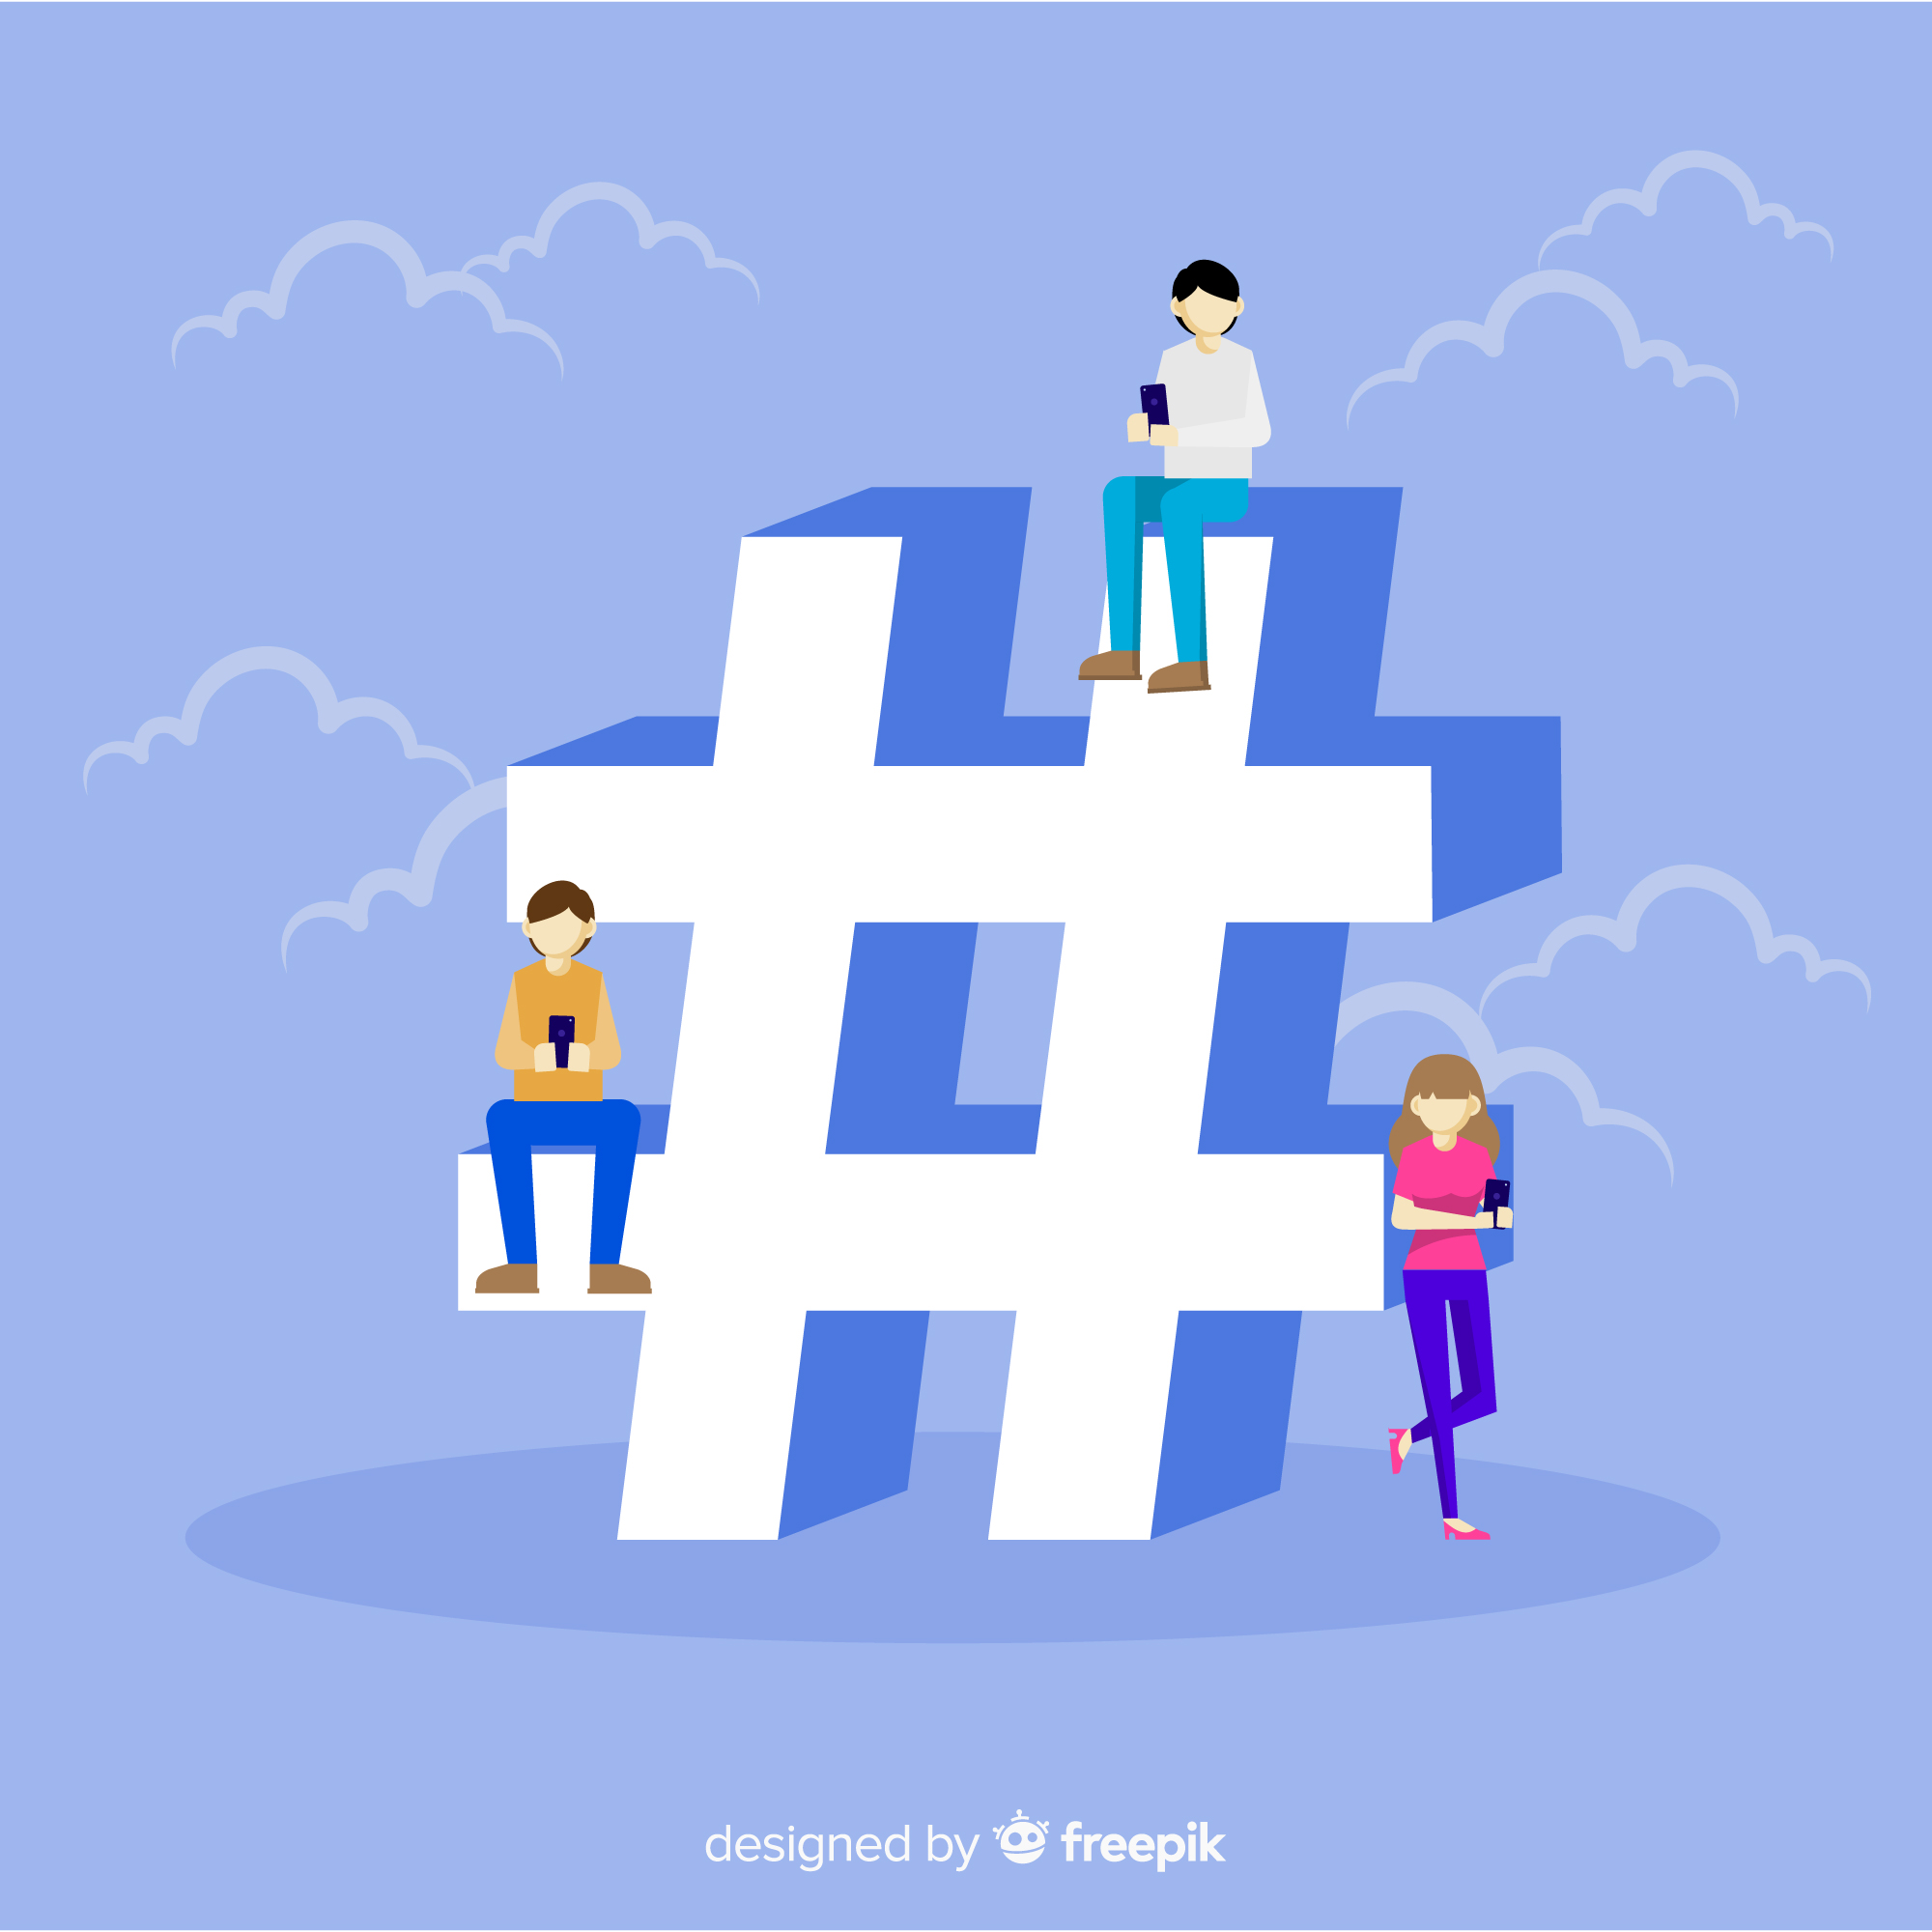 Hashtag Marketing: 8 Tactics to Boost Business 